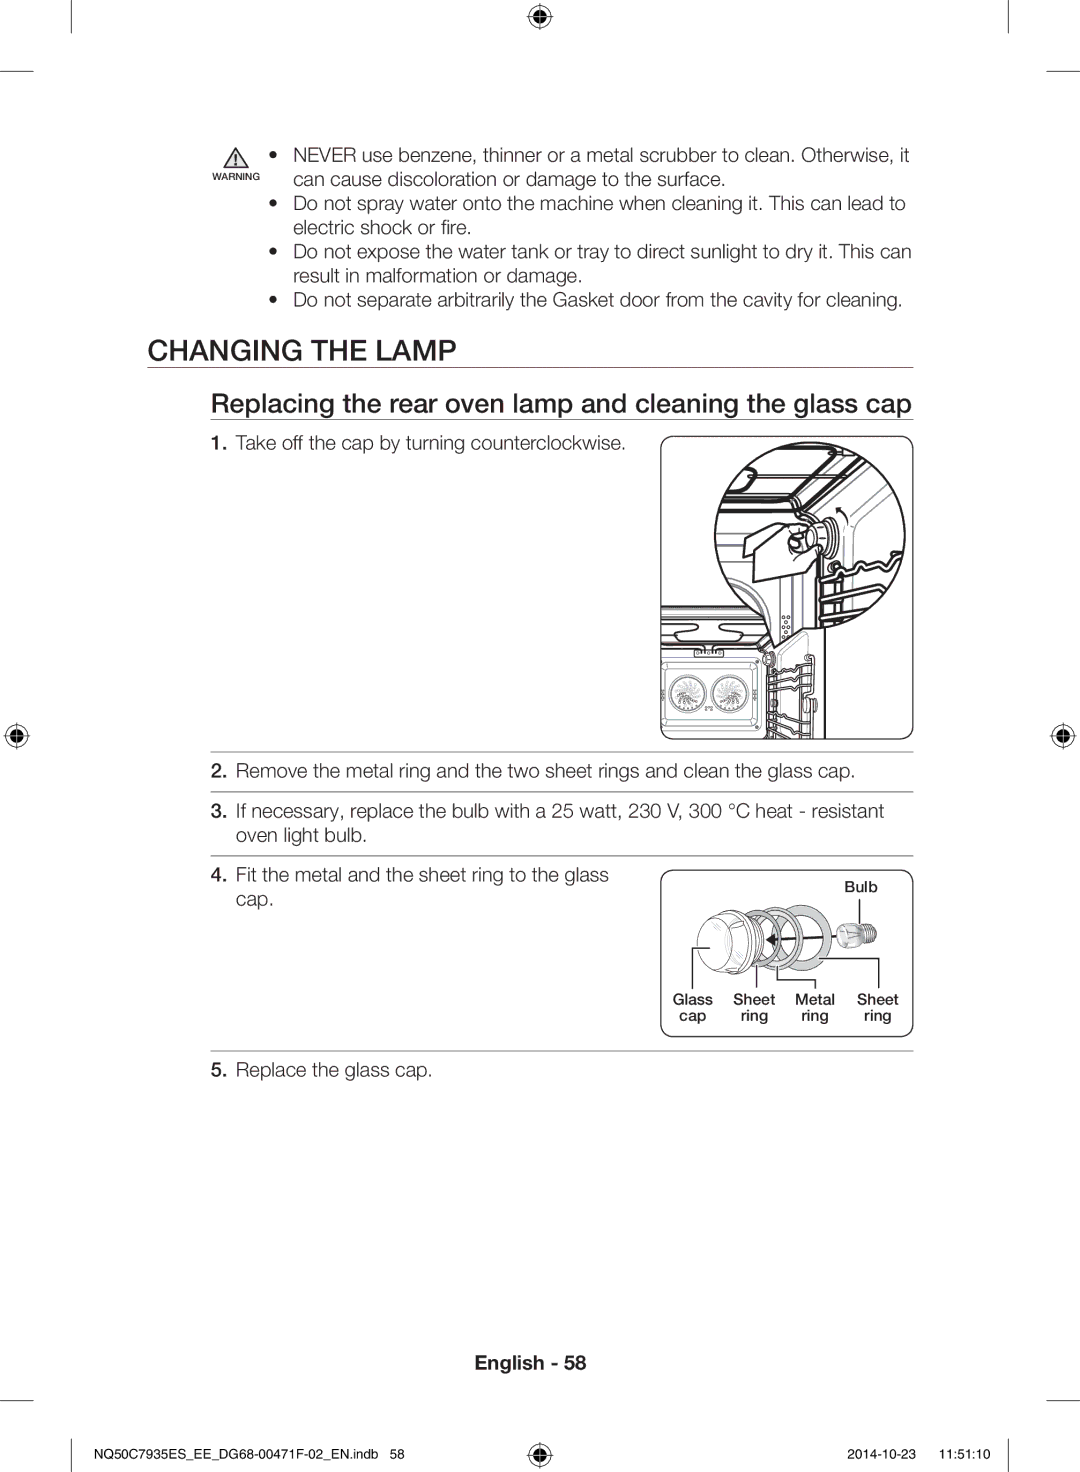 Samsung NQ50C7935ES/EE manual Changing the lamp, Replacing the rear oven lamp and cleaning the glass cap, Cap 